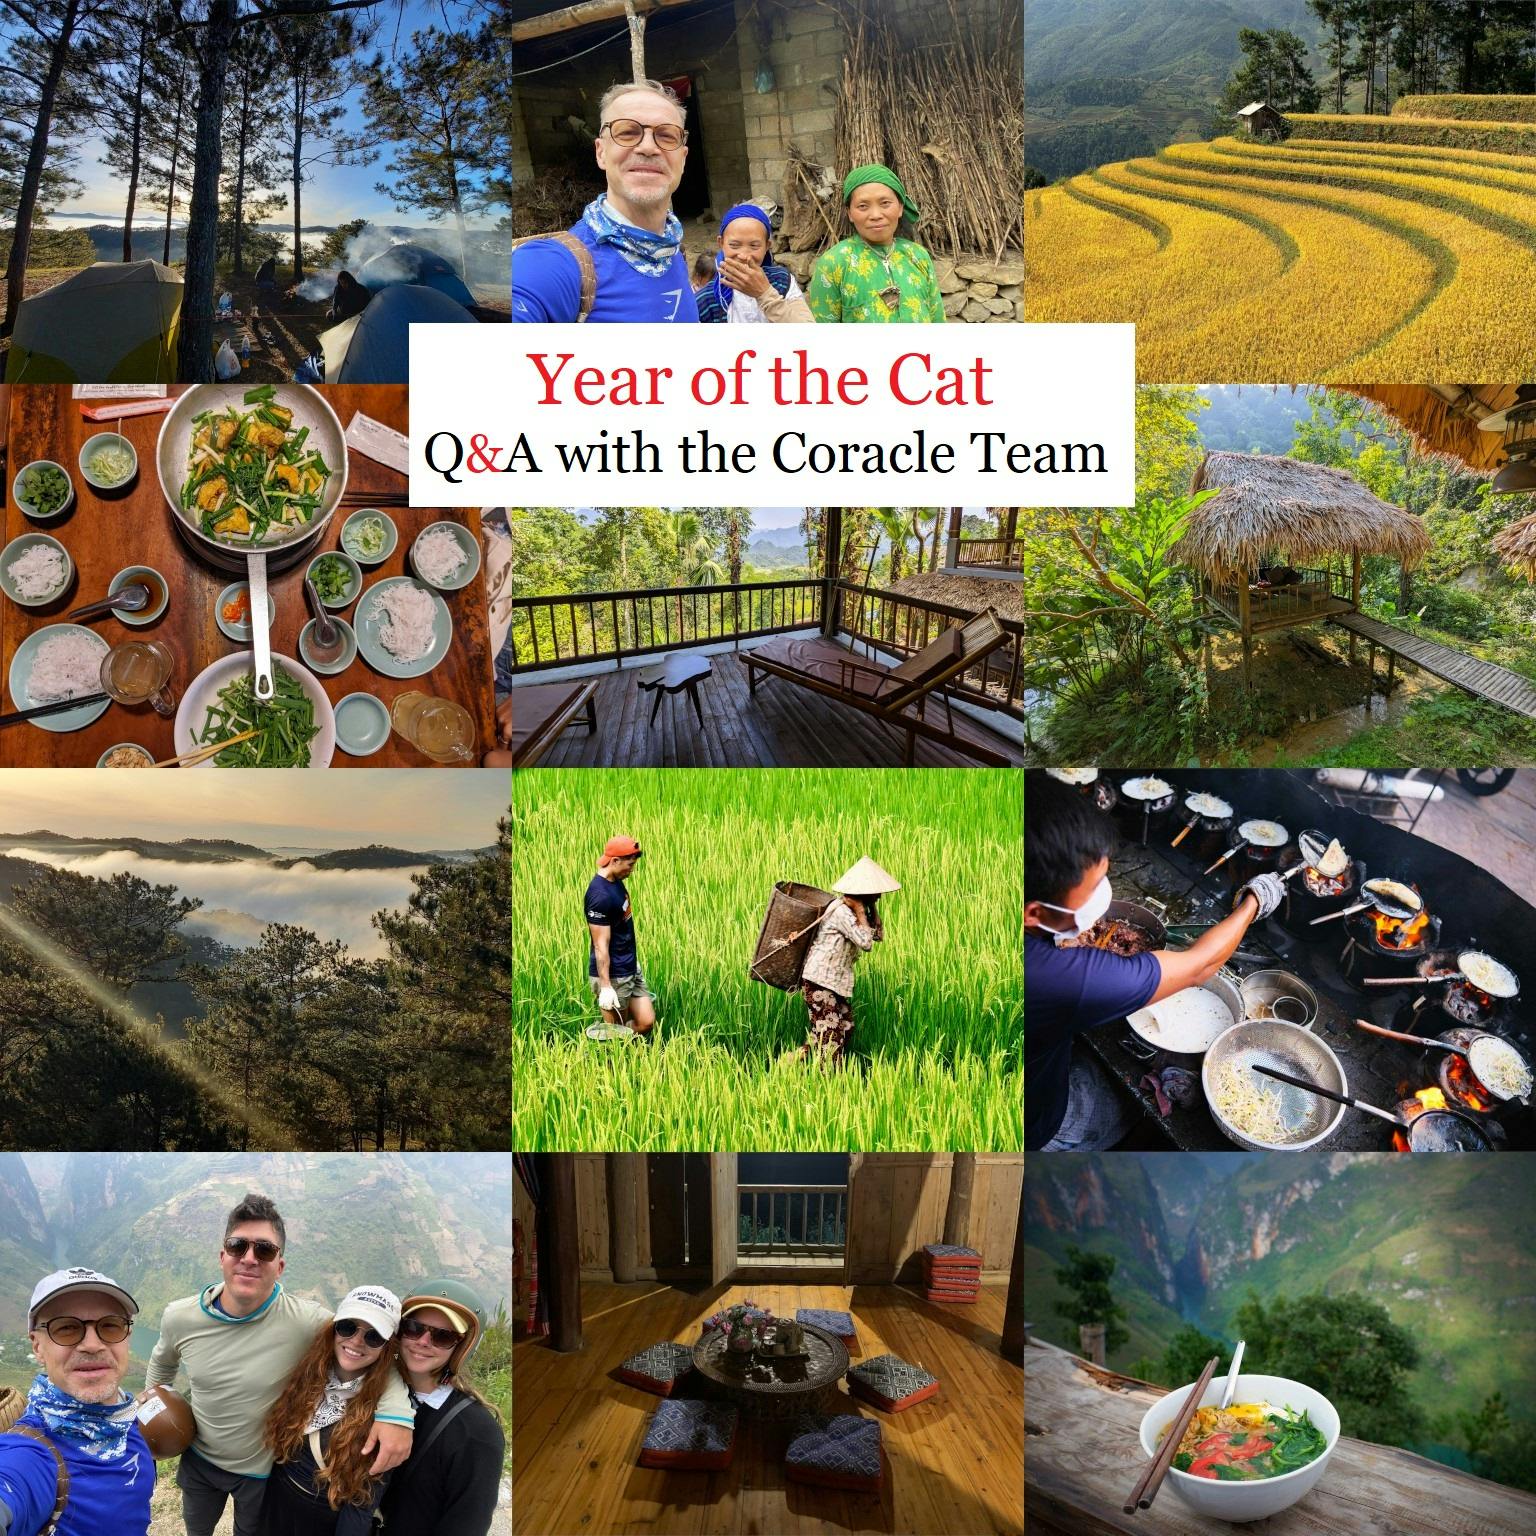 Year of the Cat Q&A with the Coracle Team